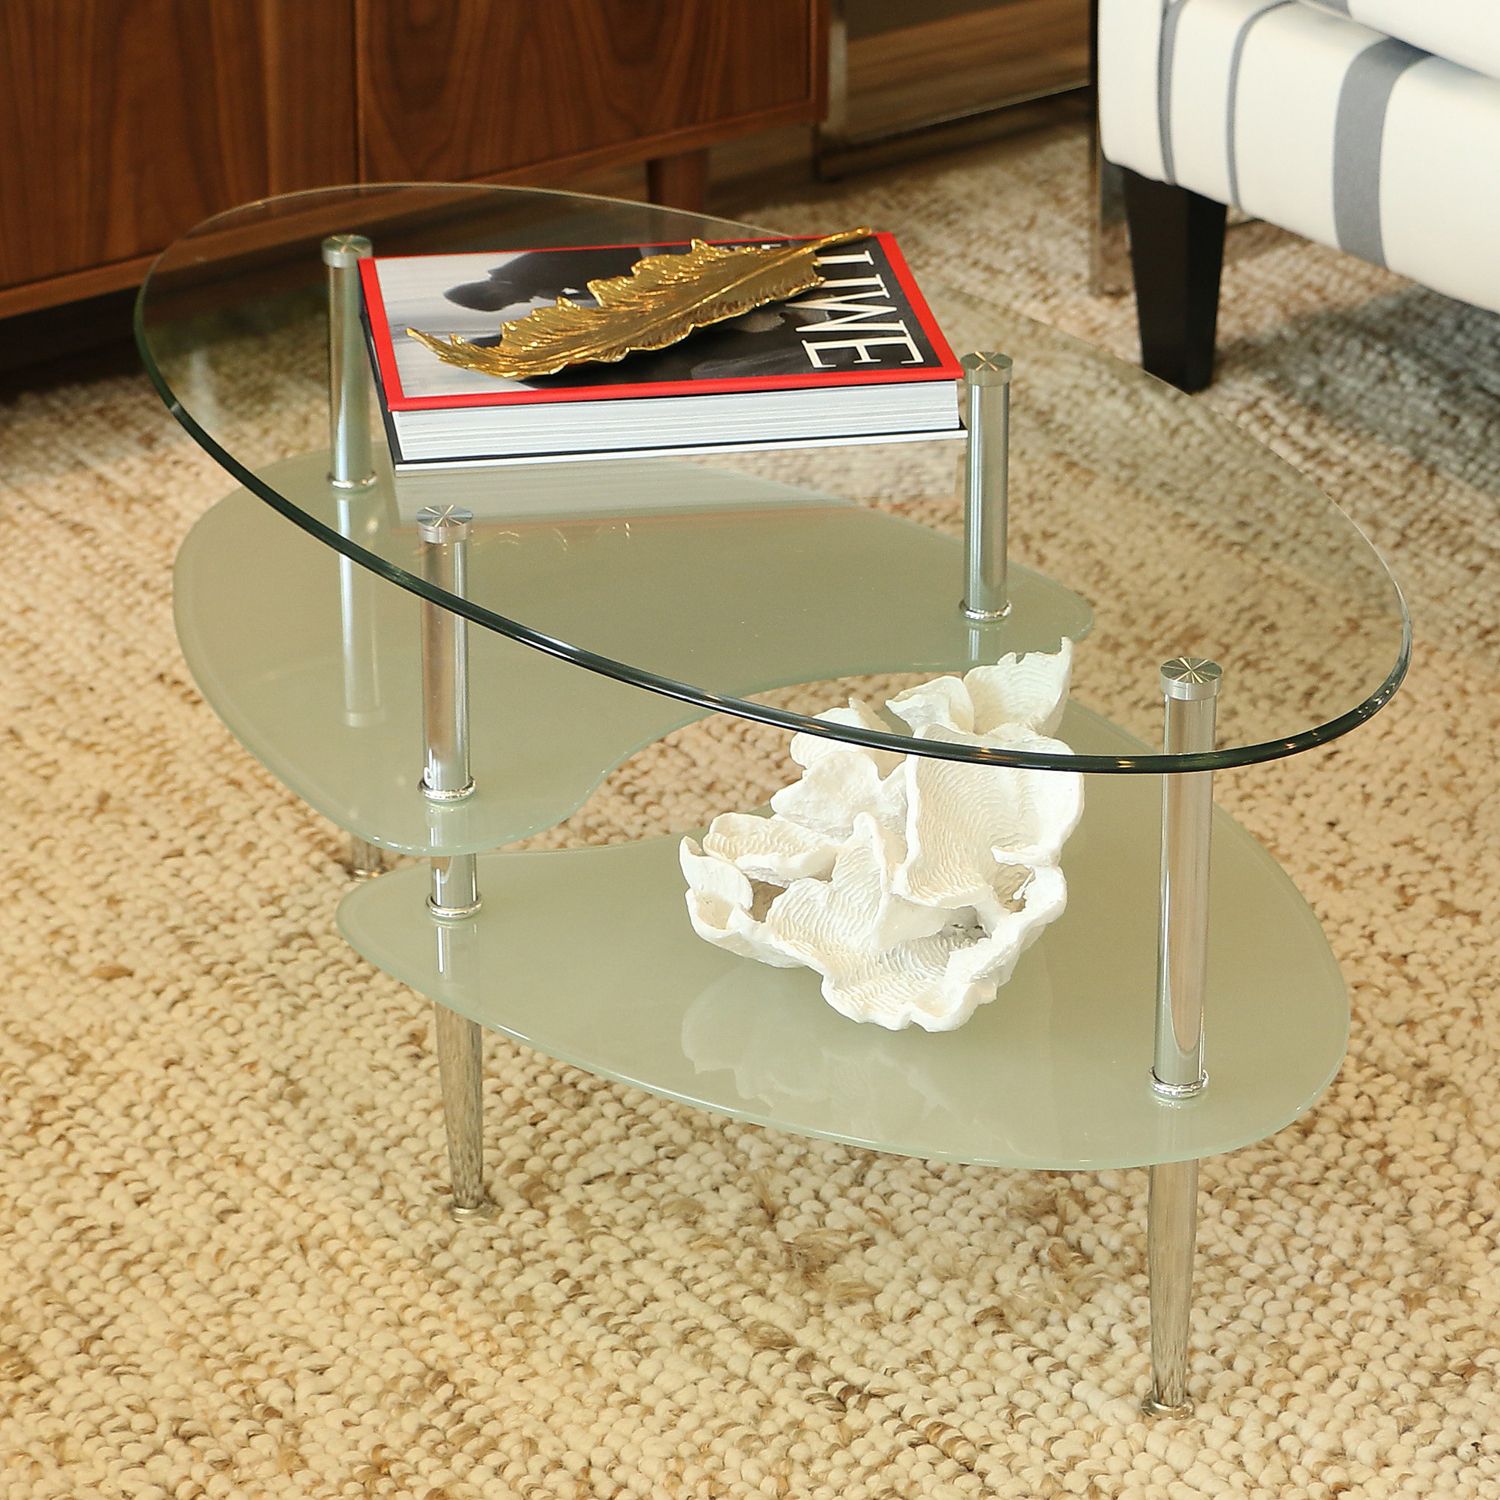 Famous Oval Glass Coffee Tables For Oval Glass Coffee Table With Chrome Legs – Pier1 Imports (View 10 of 15)